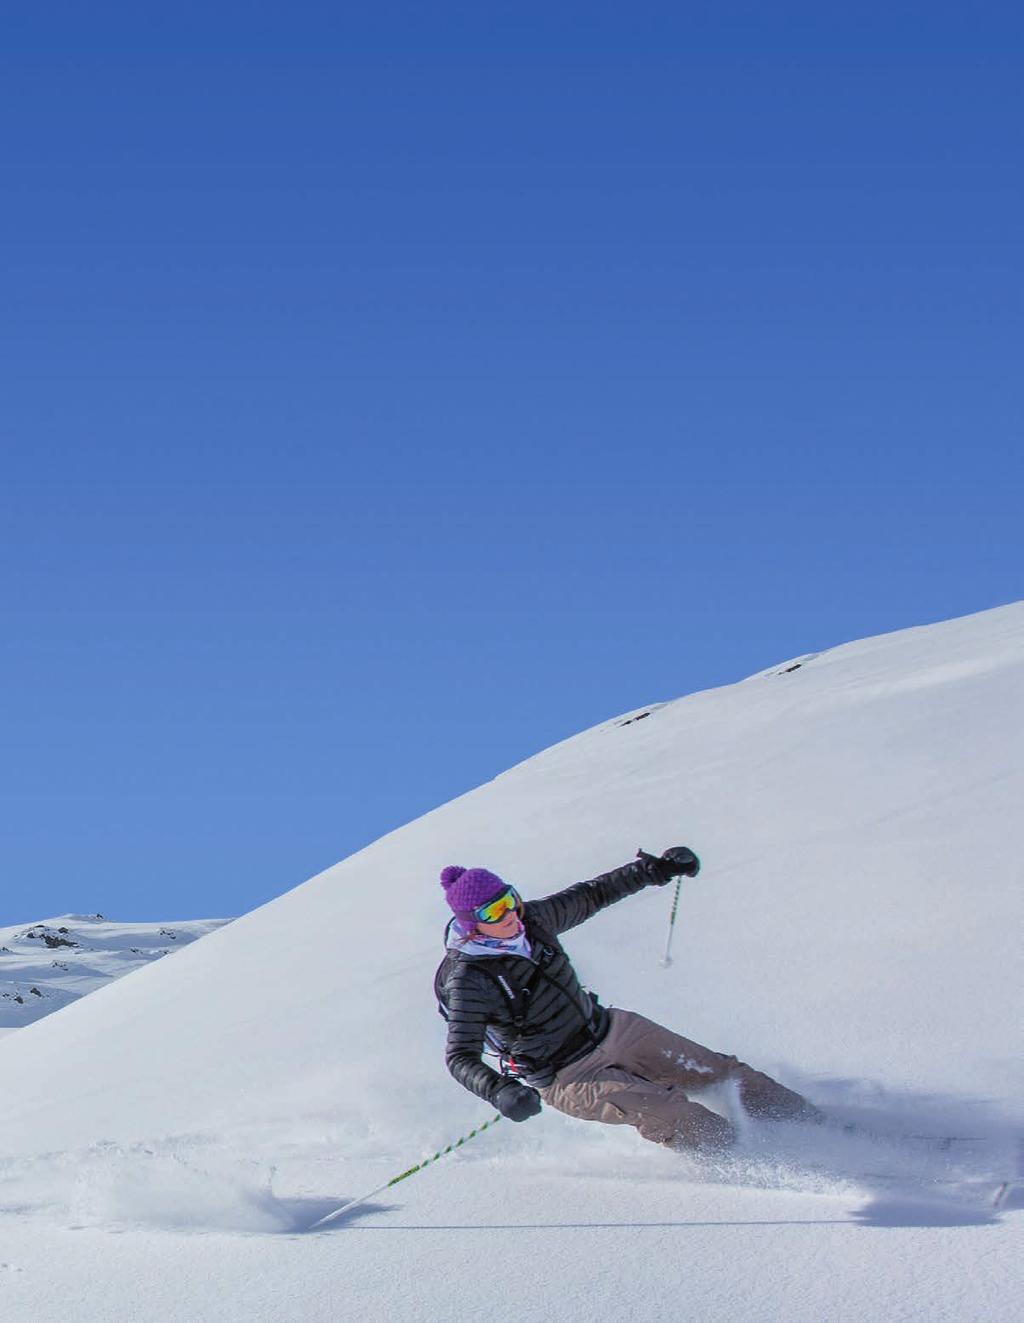 SLOPING OFF Alf Alderson hits the slopes above Bonneval-sur-Arc and discovers a